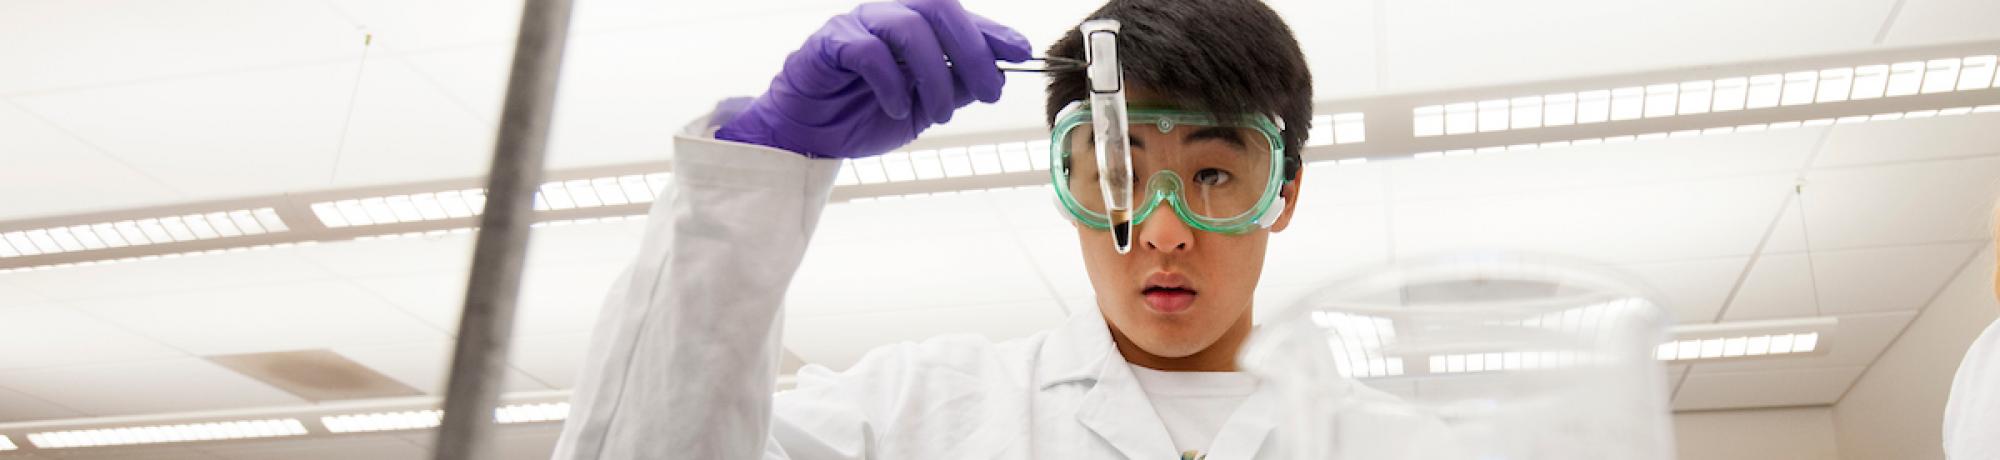 student in lab coat holding test tube